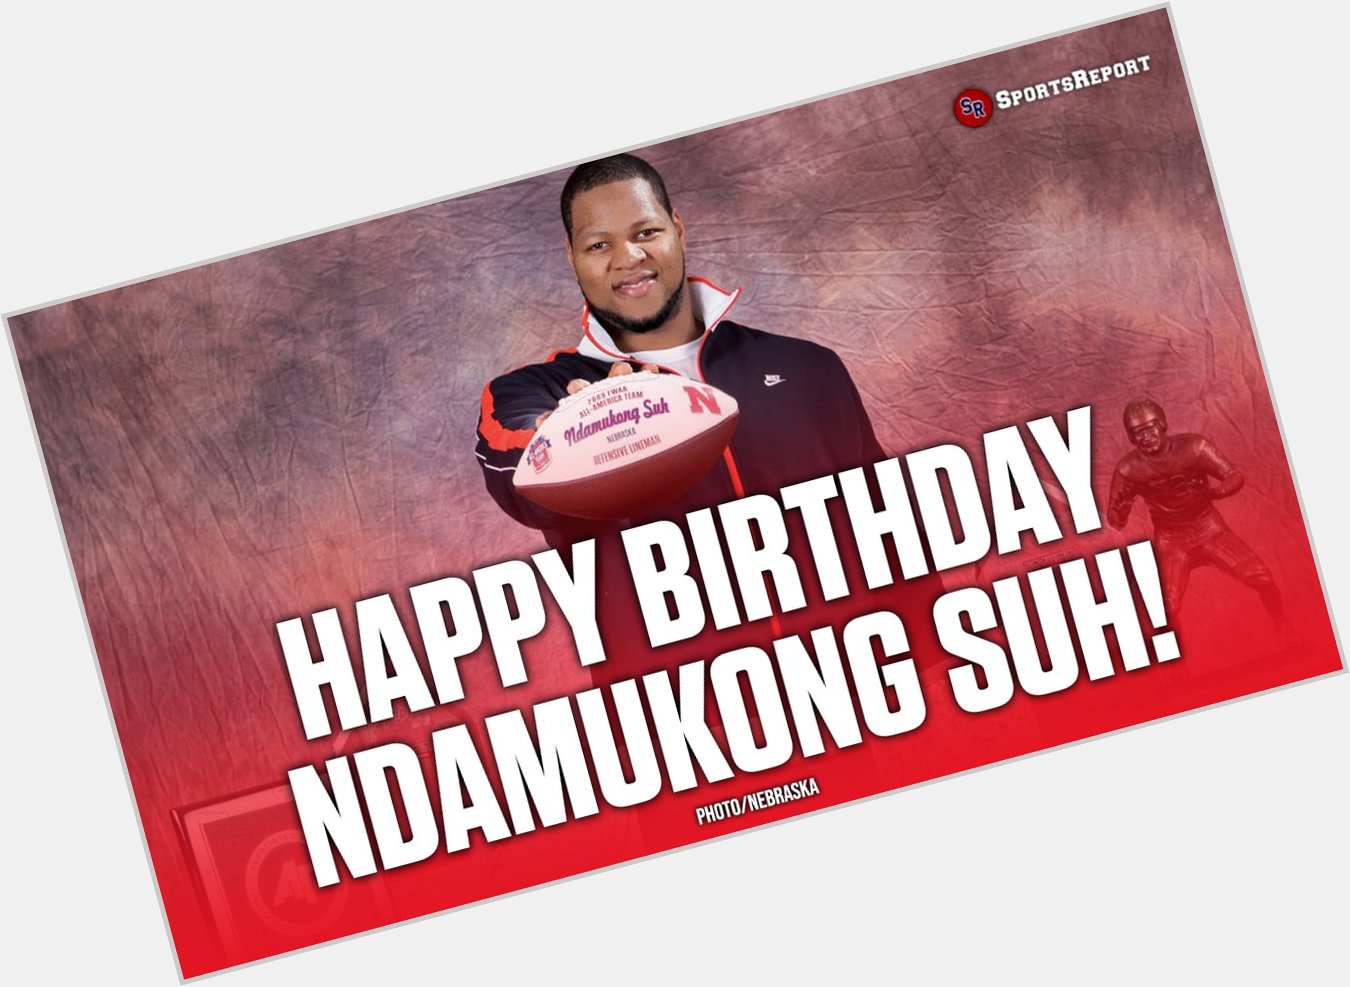  Fans, let\s wish great Ndamukong Suh a Happy Birthday! 